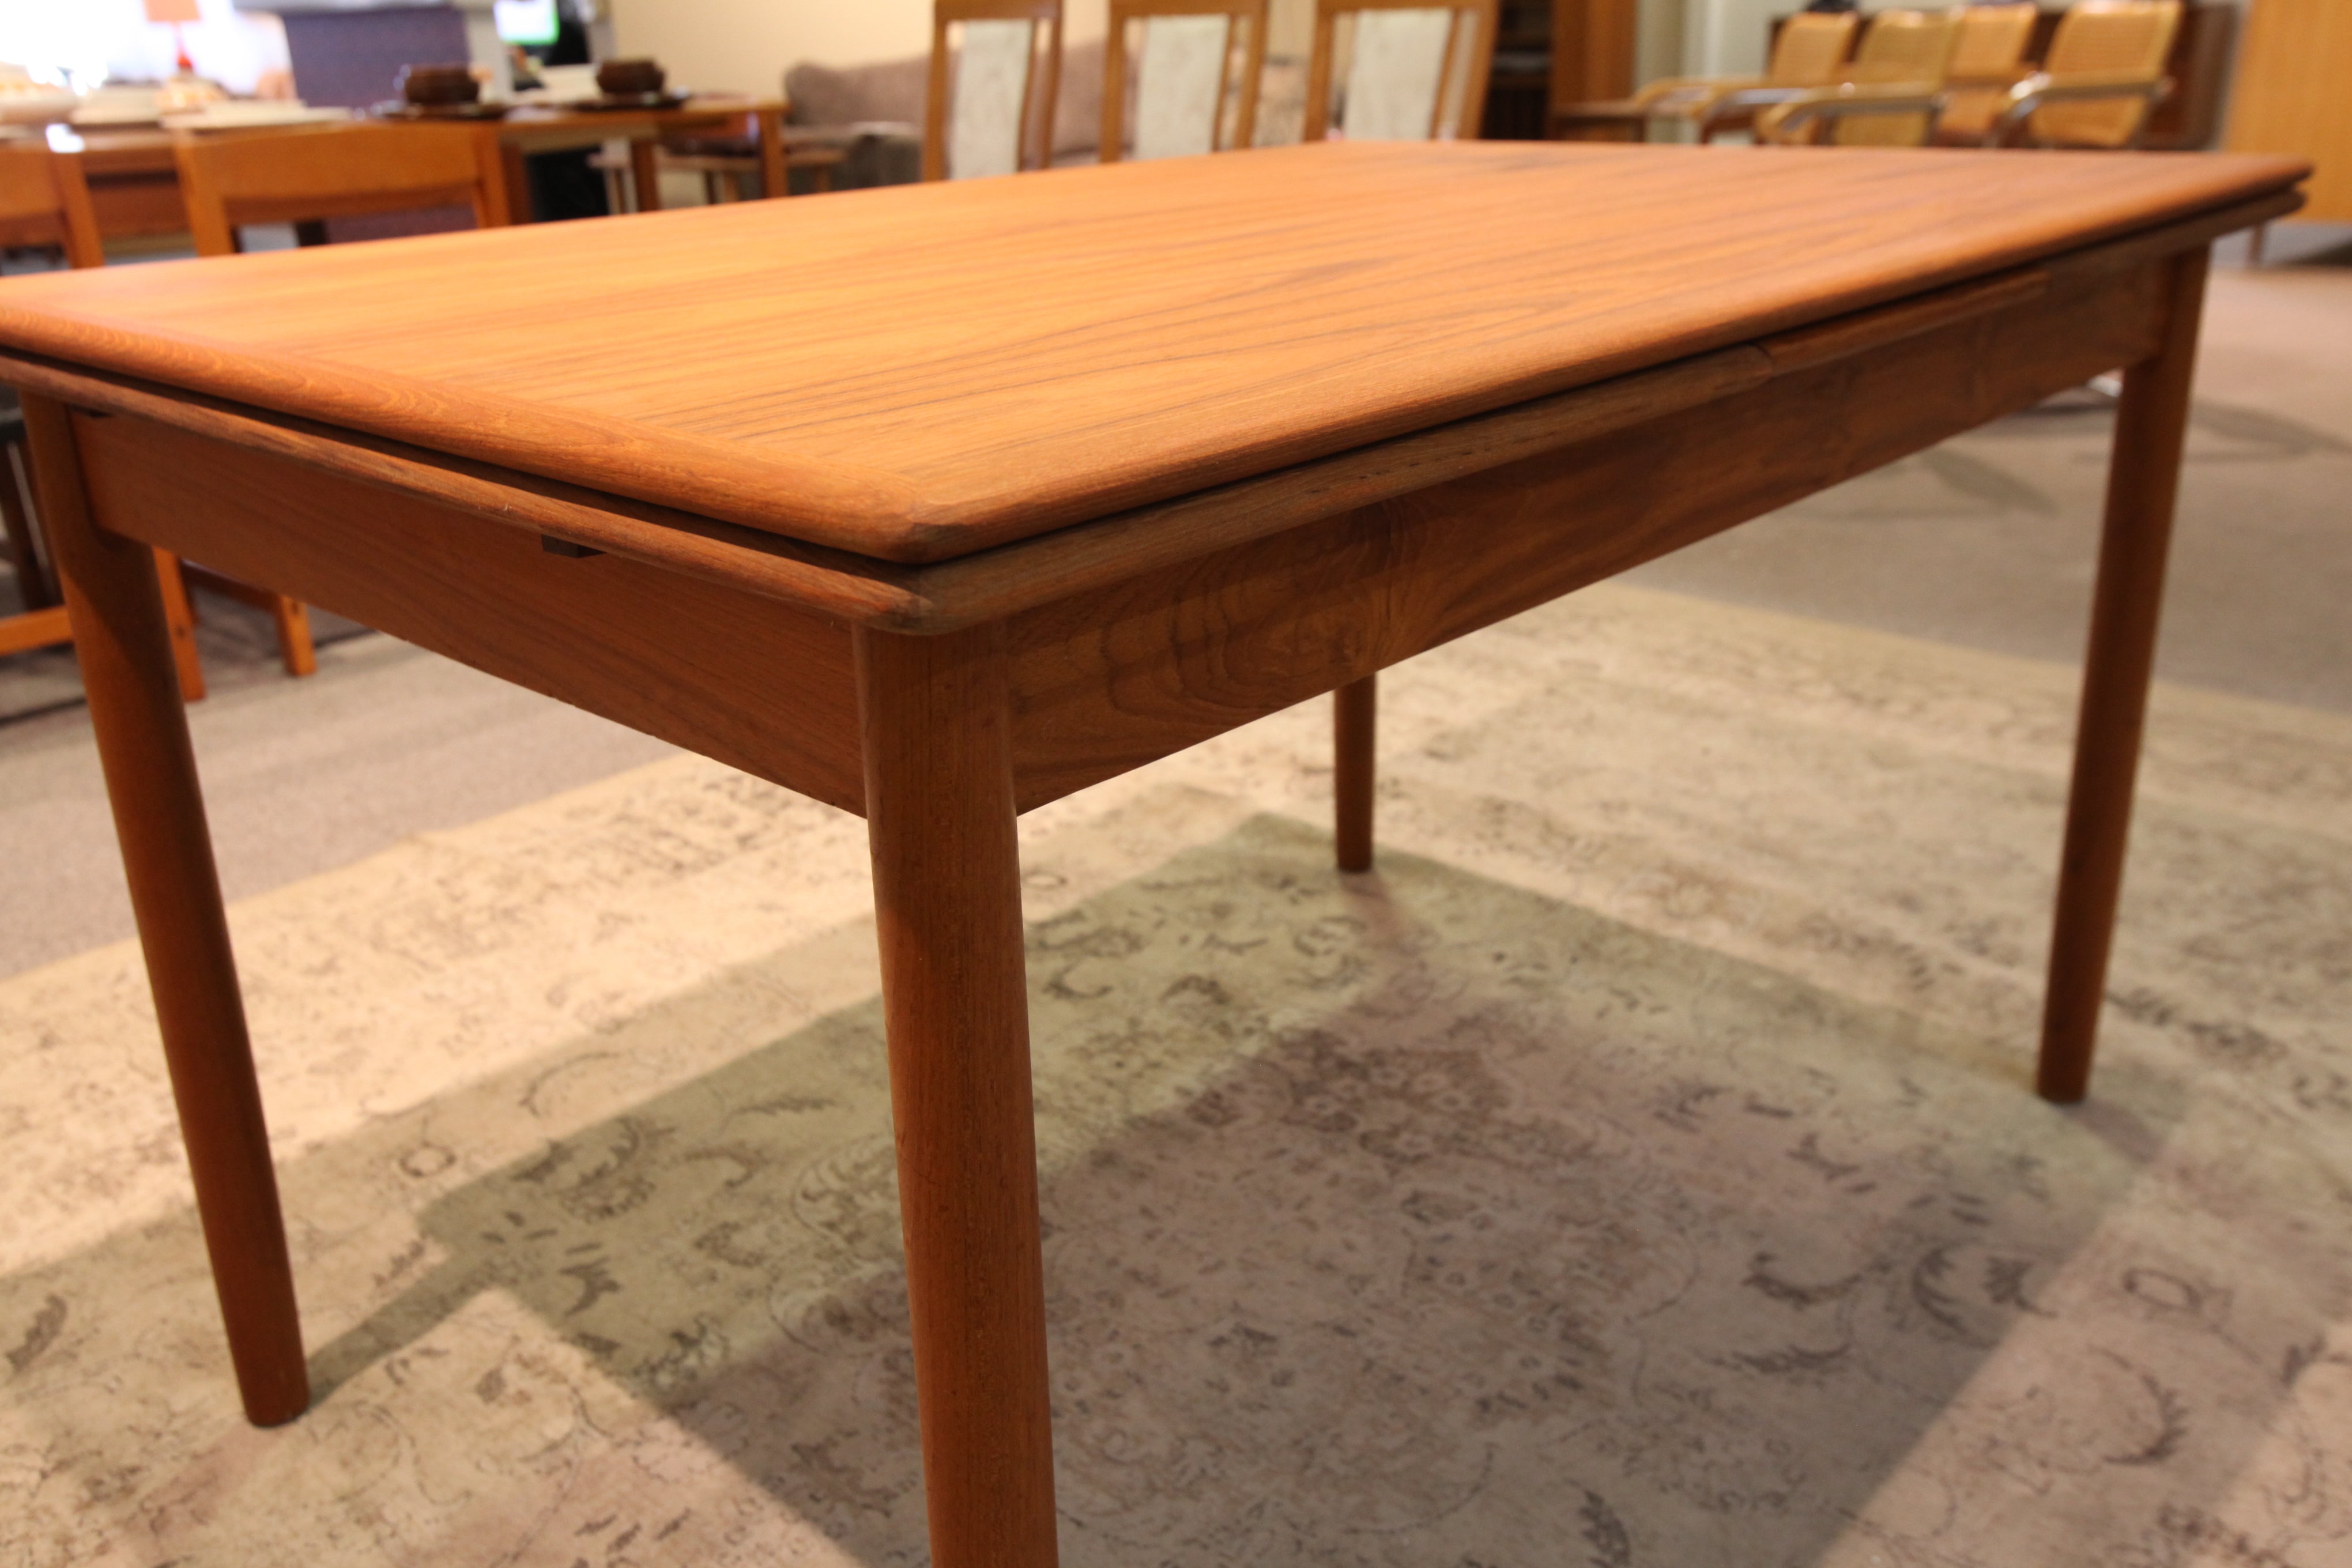 Teak Extension Table (33.75" x 49.5") or (33.75" x 86.5")